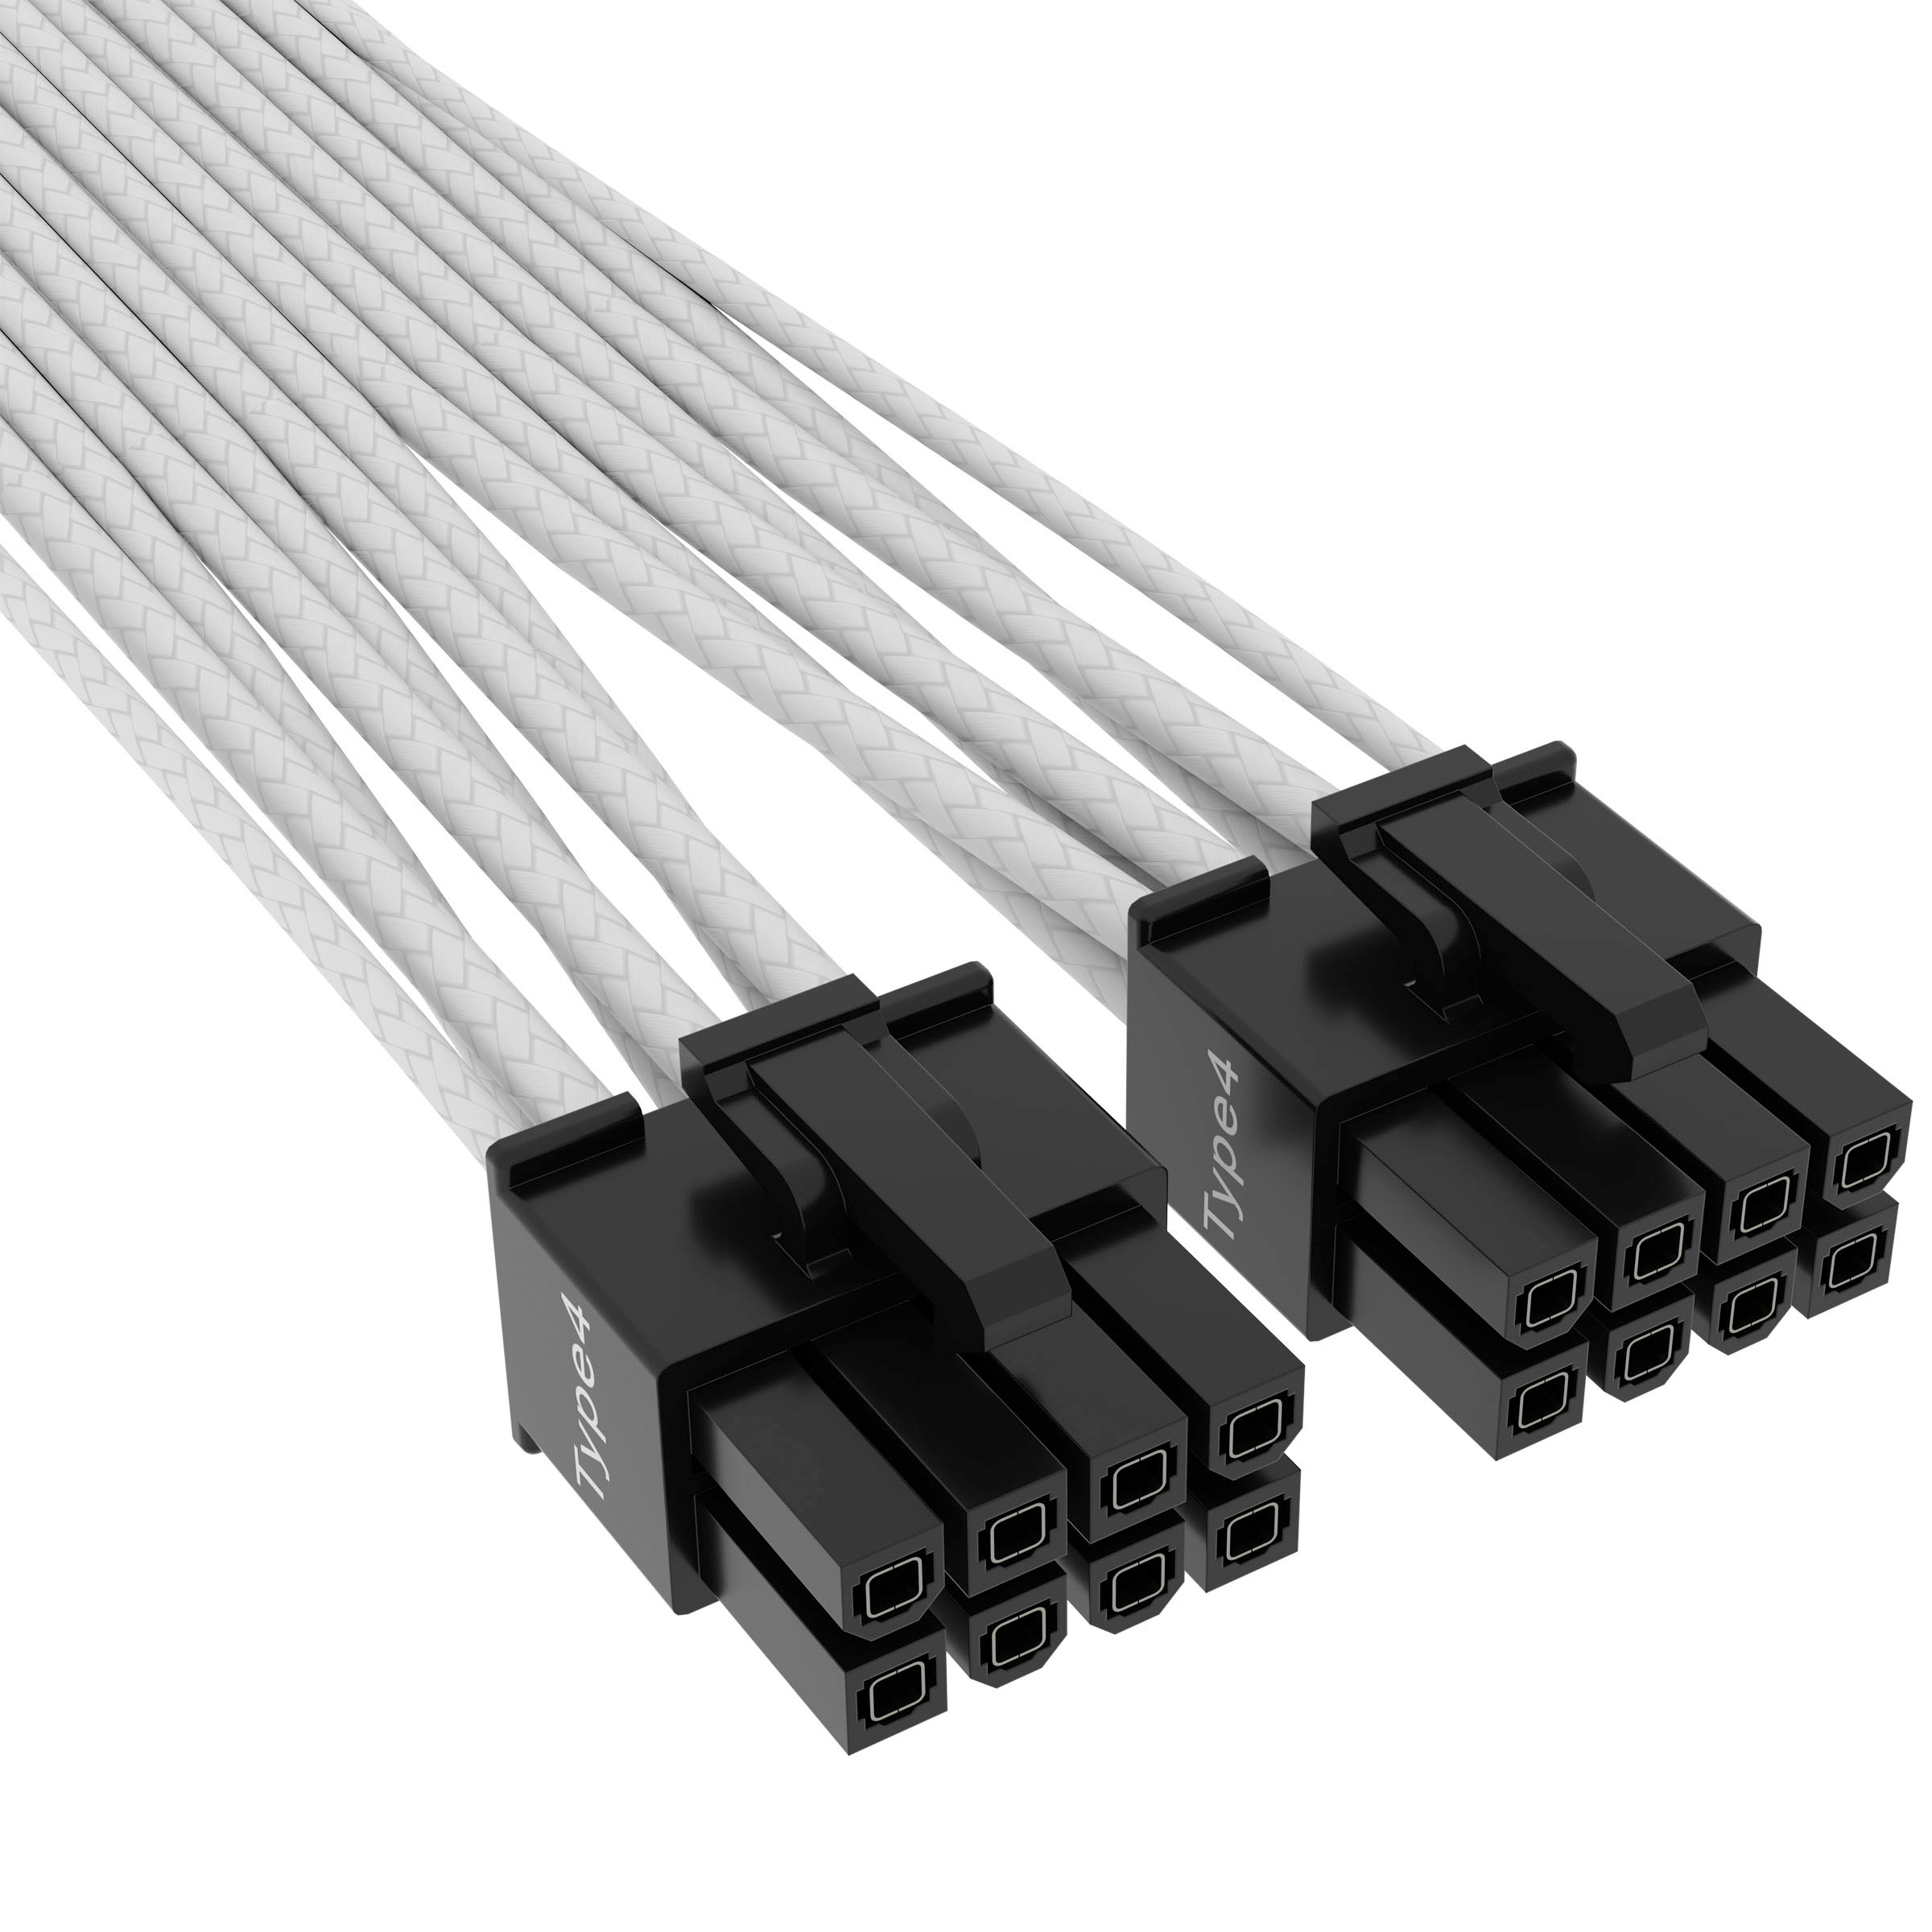 Cable - Best 12VHPWR White Gen 12+4pin Sleeved 5 CP-8920332 2\' 600W Premium CORSAIR Individually Type-4 PCIe Buy